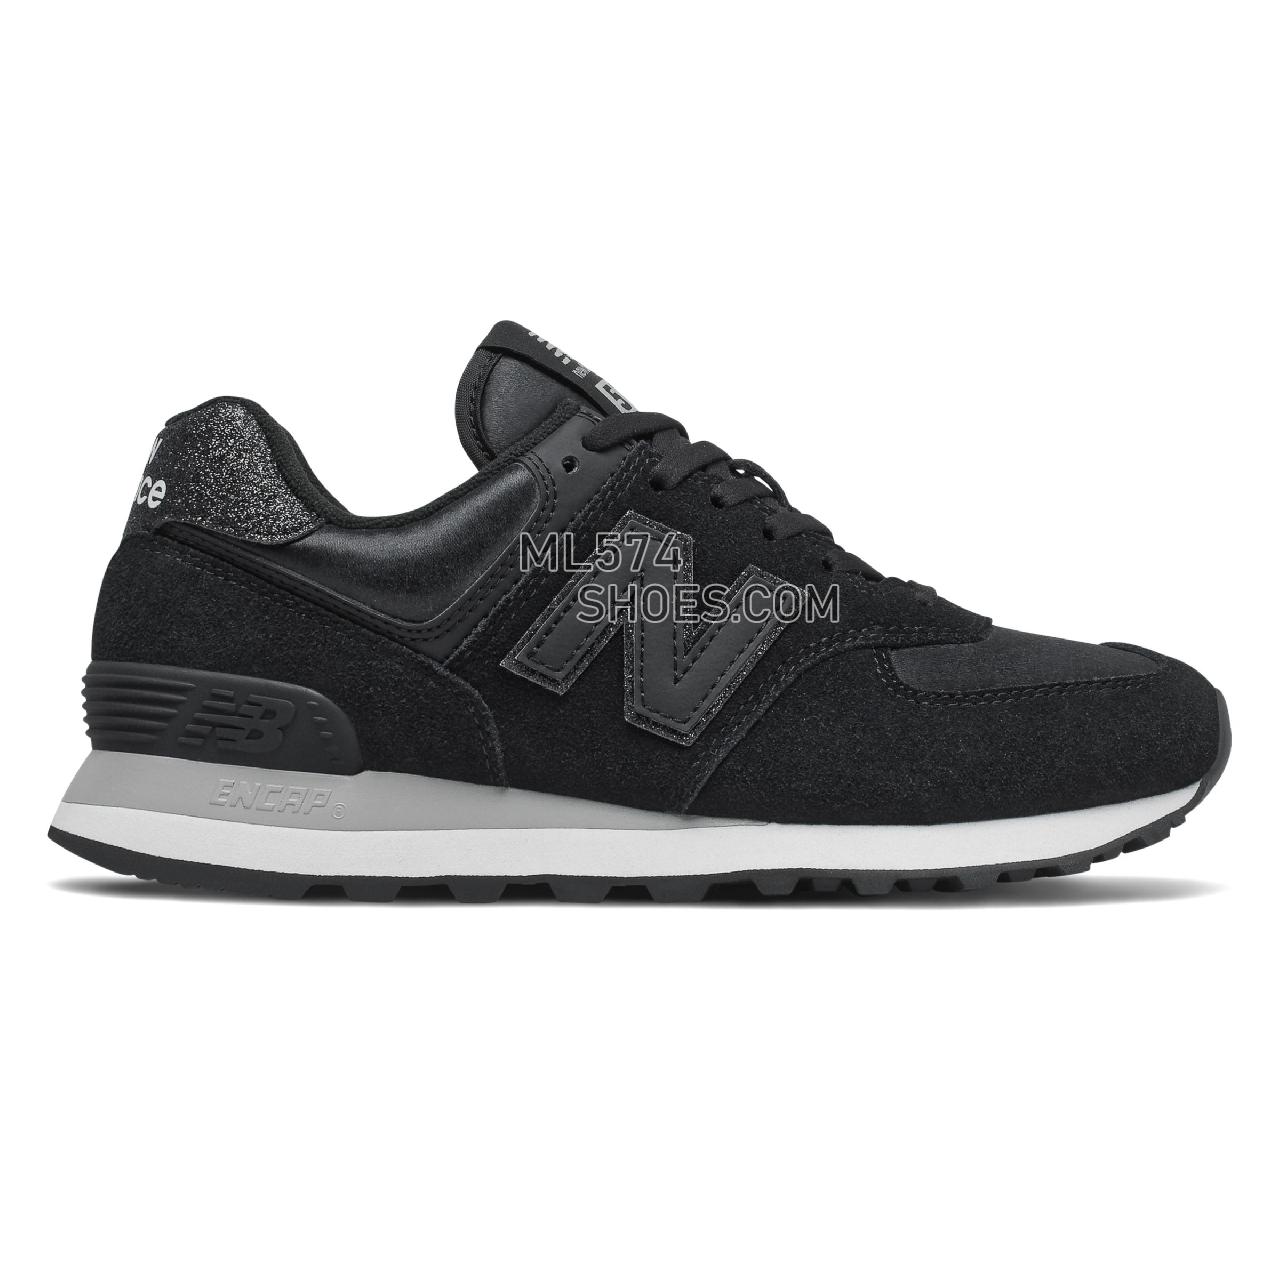 New Balance 574 - Women's Classic Sneakers - Black with Rain Cloud - WL574FH2